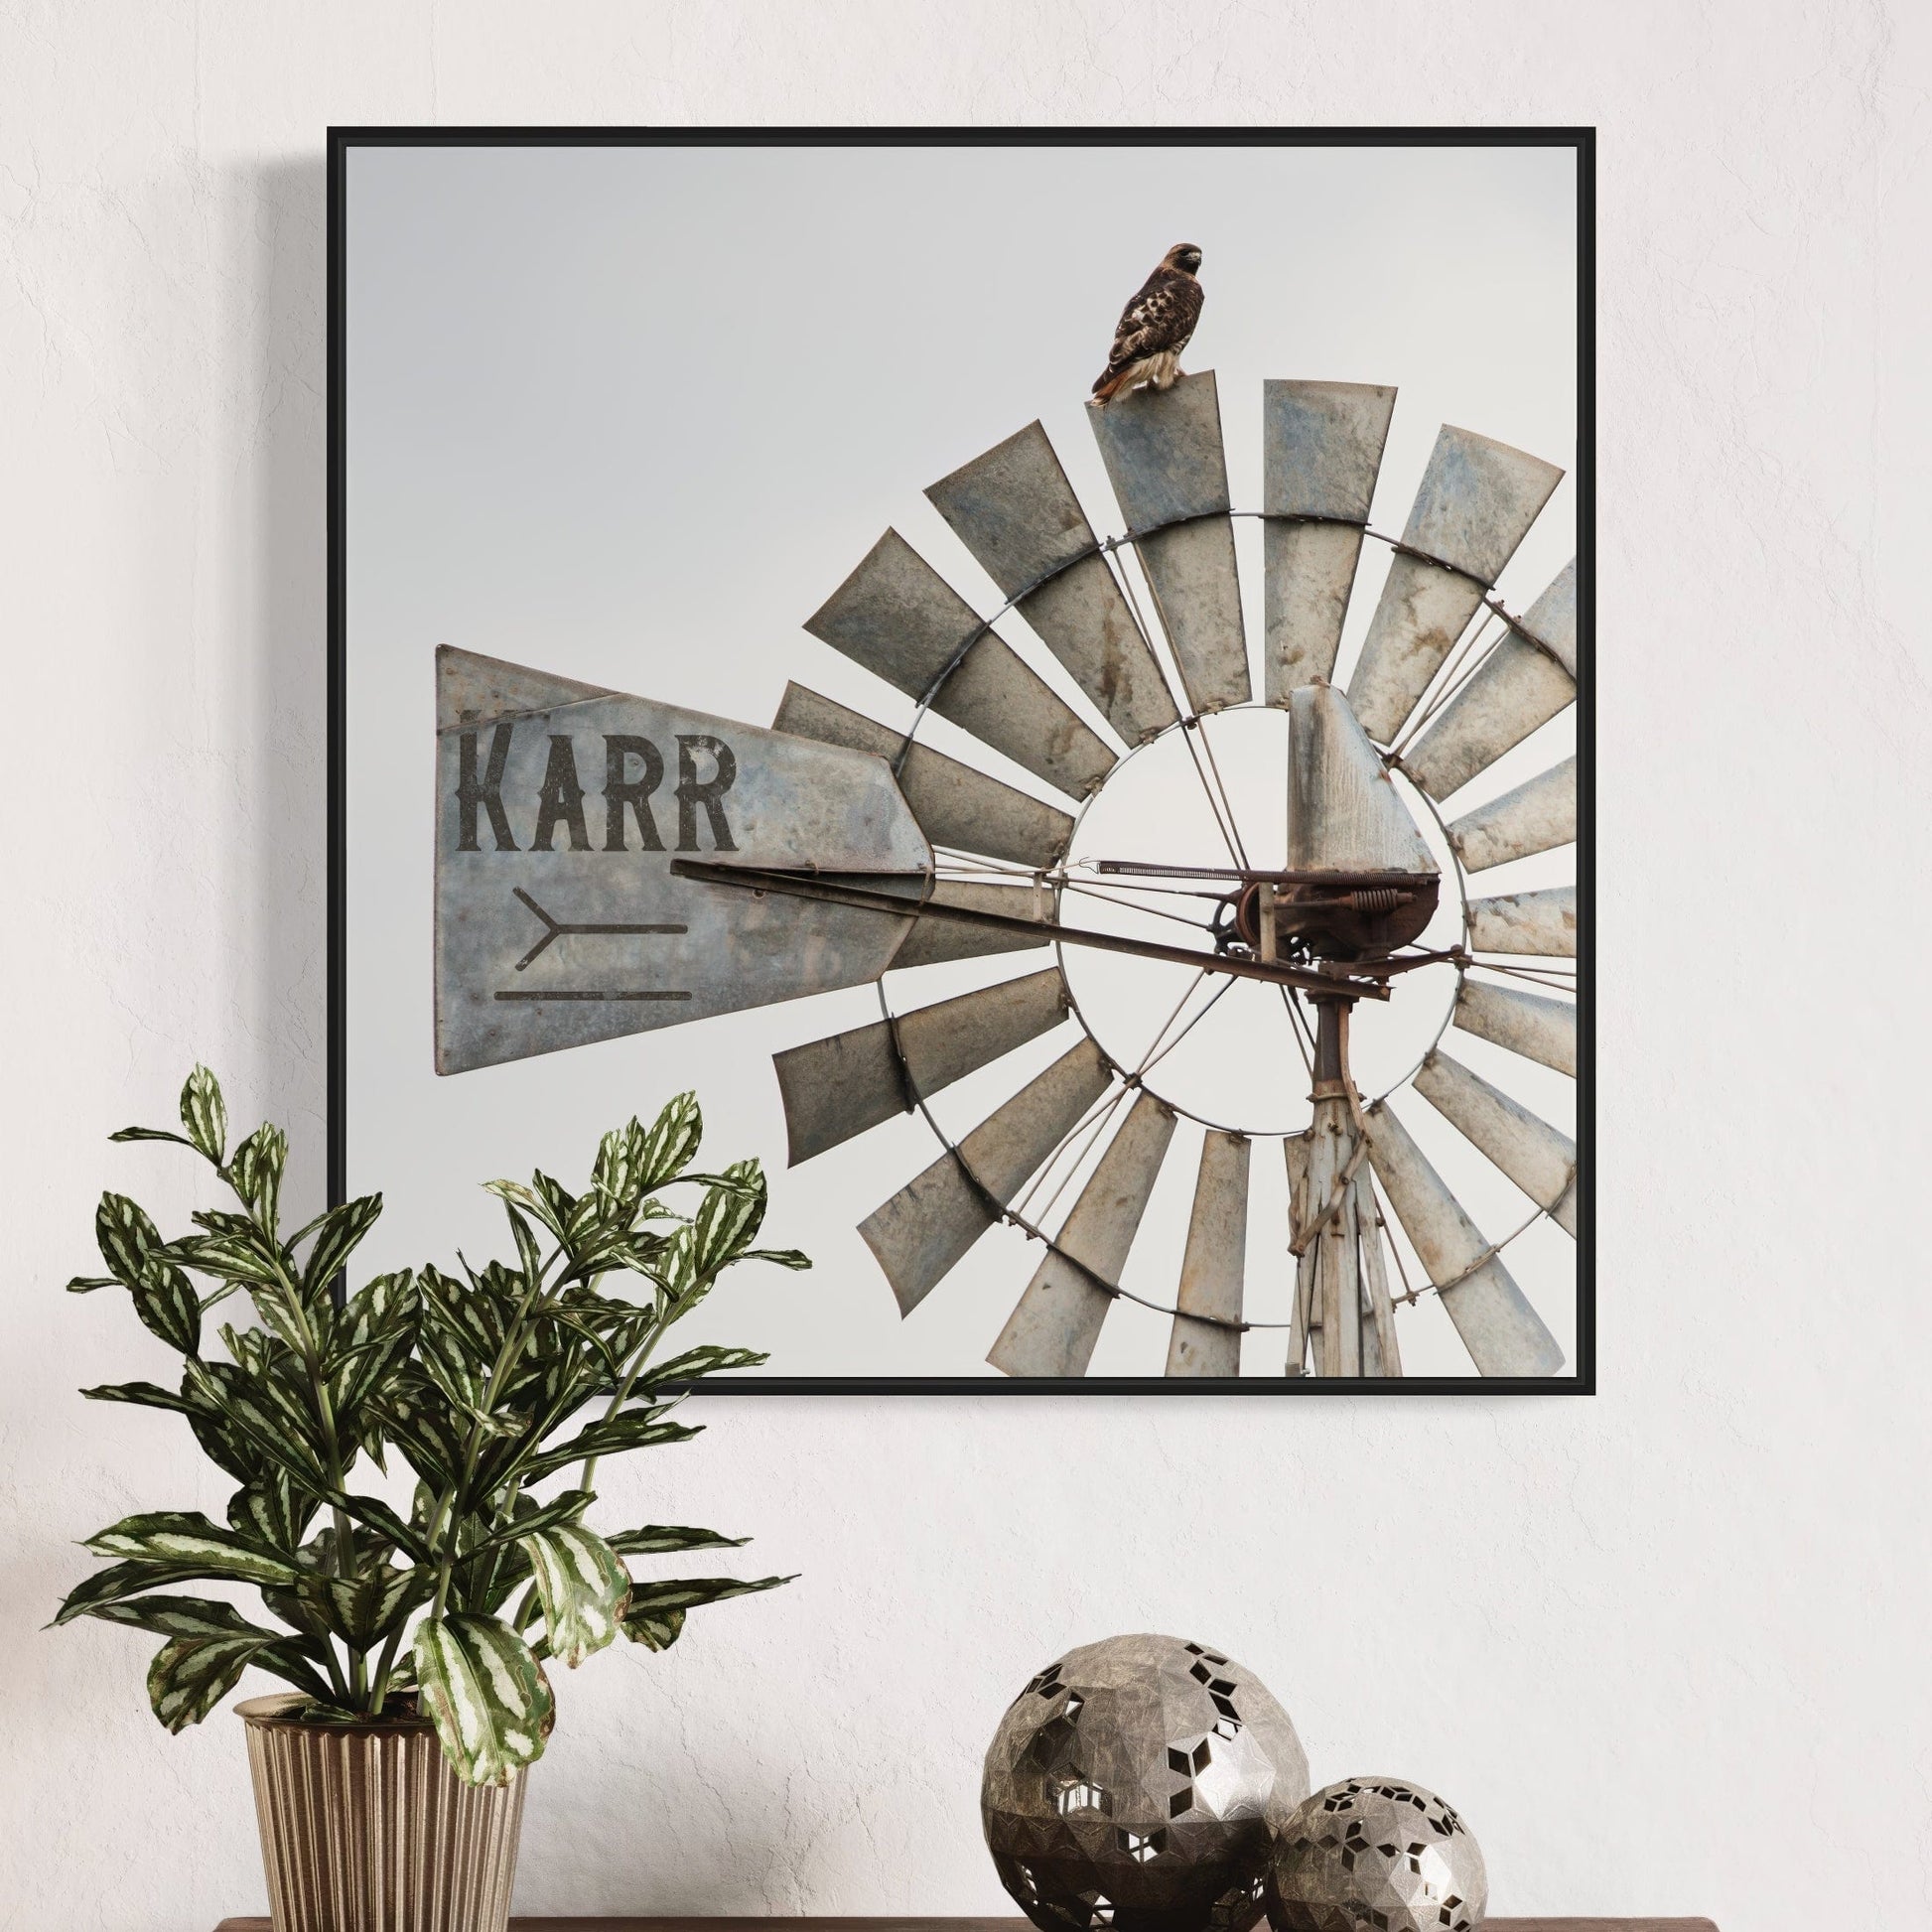 Personalized Cattle Brand Art - Windmill With Your Livestock Brand Wall Art Teri James Photography